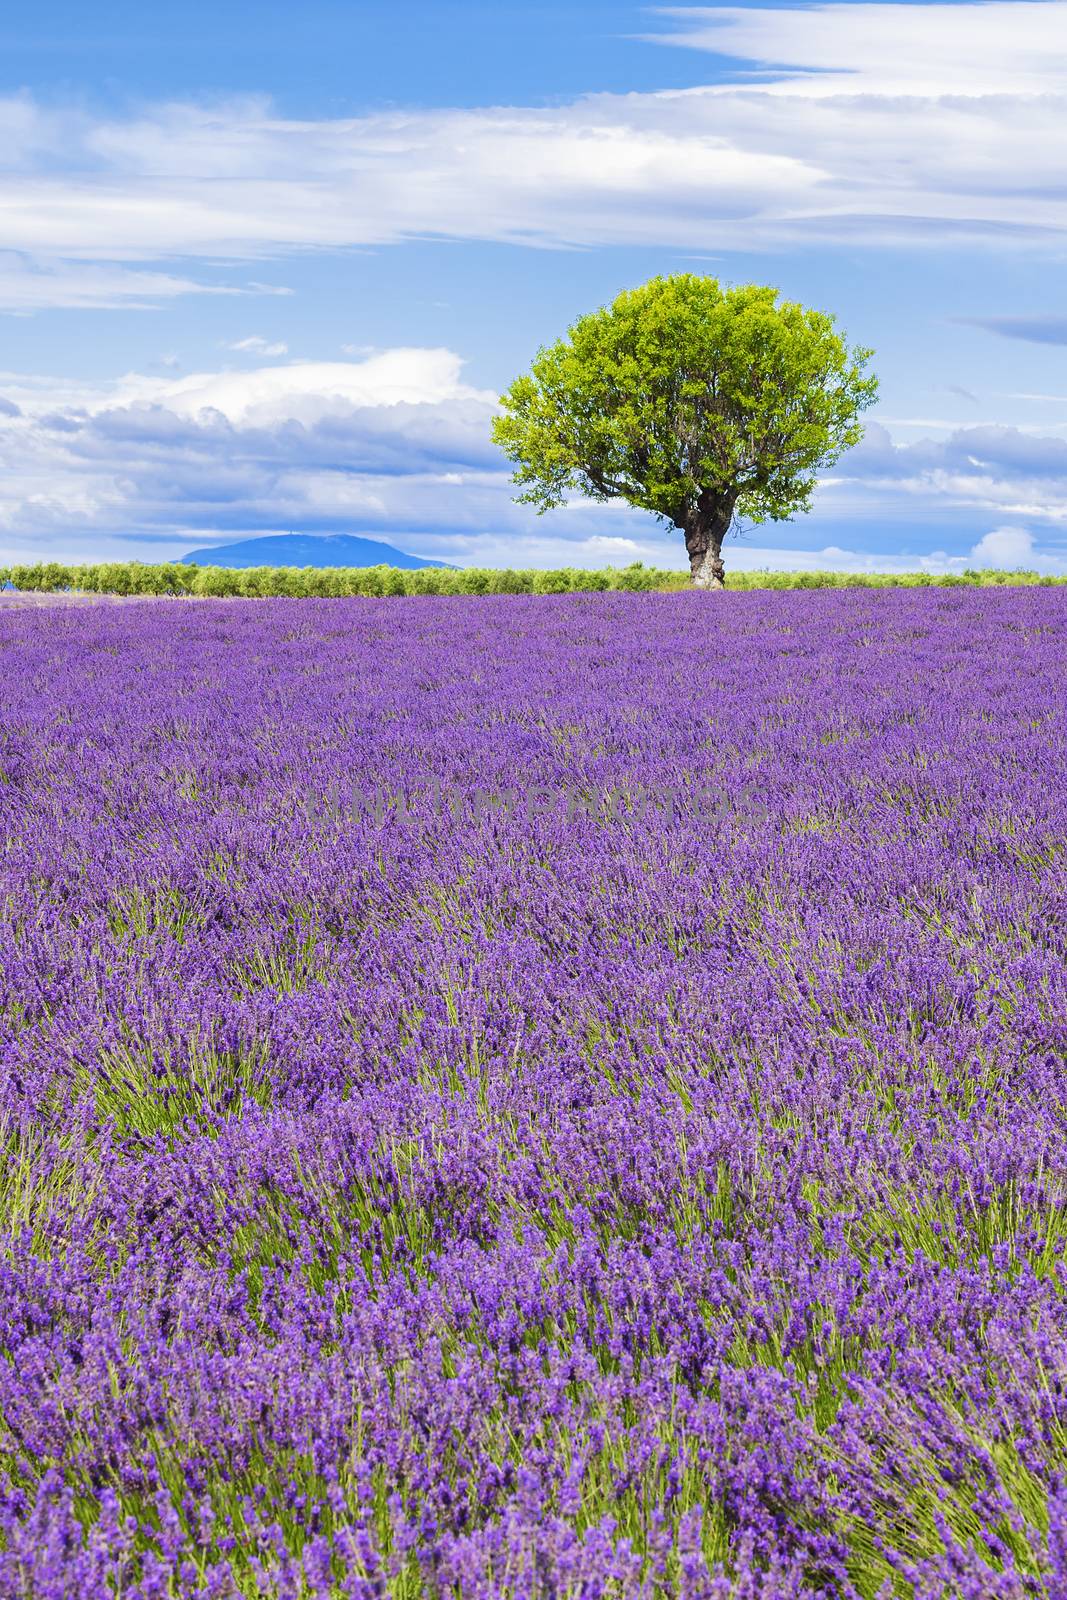 View of Lavender field with tree in Provence, France